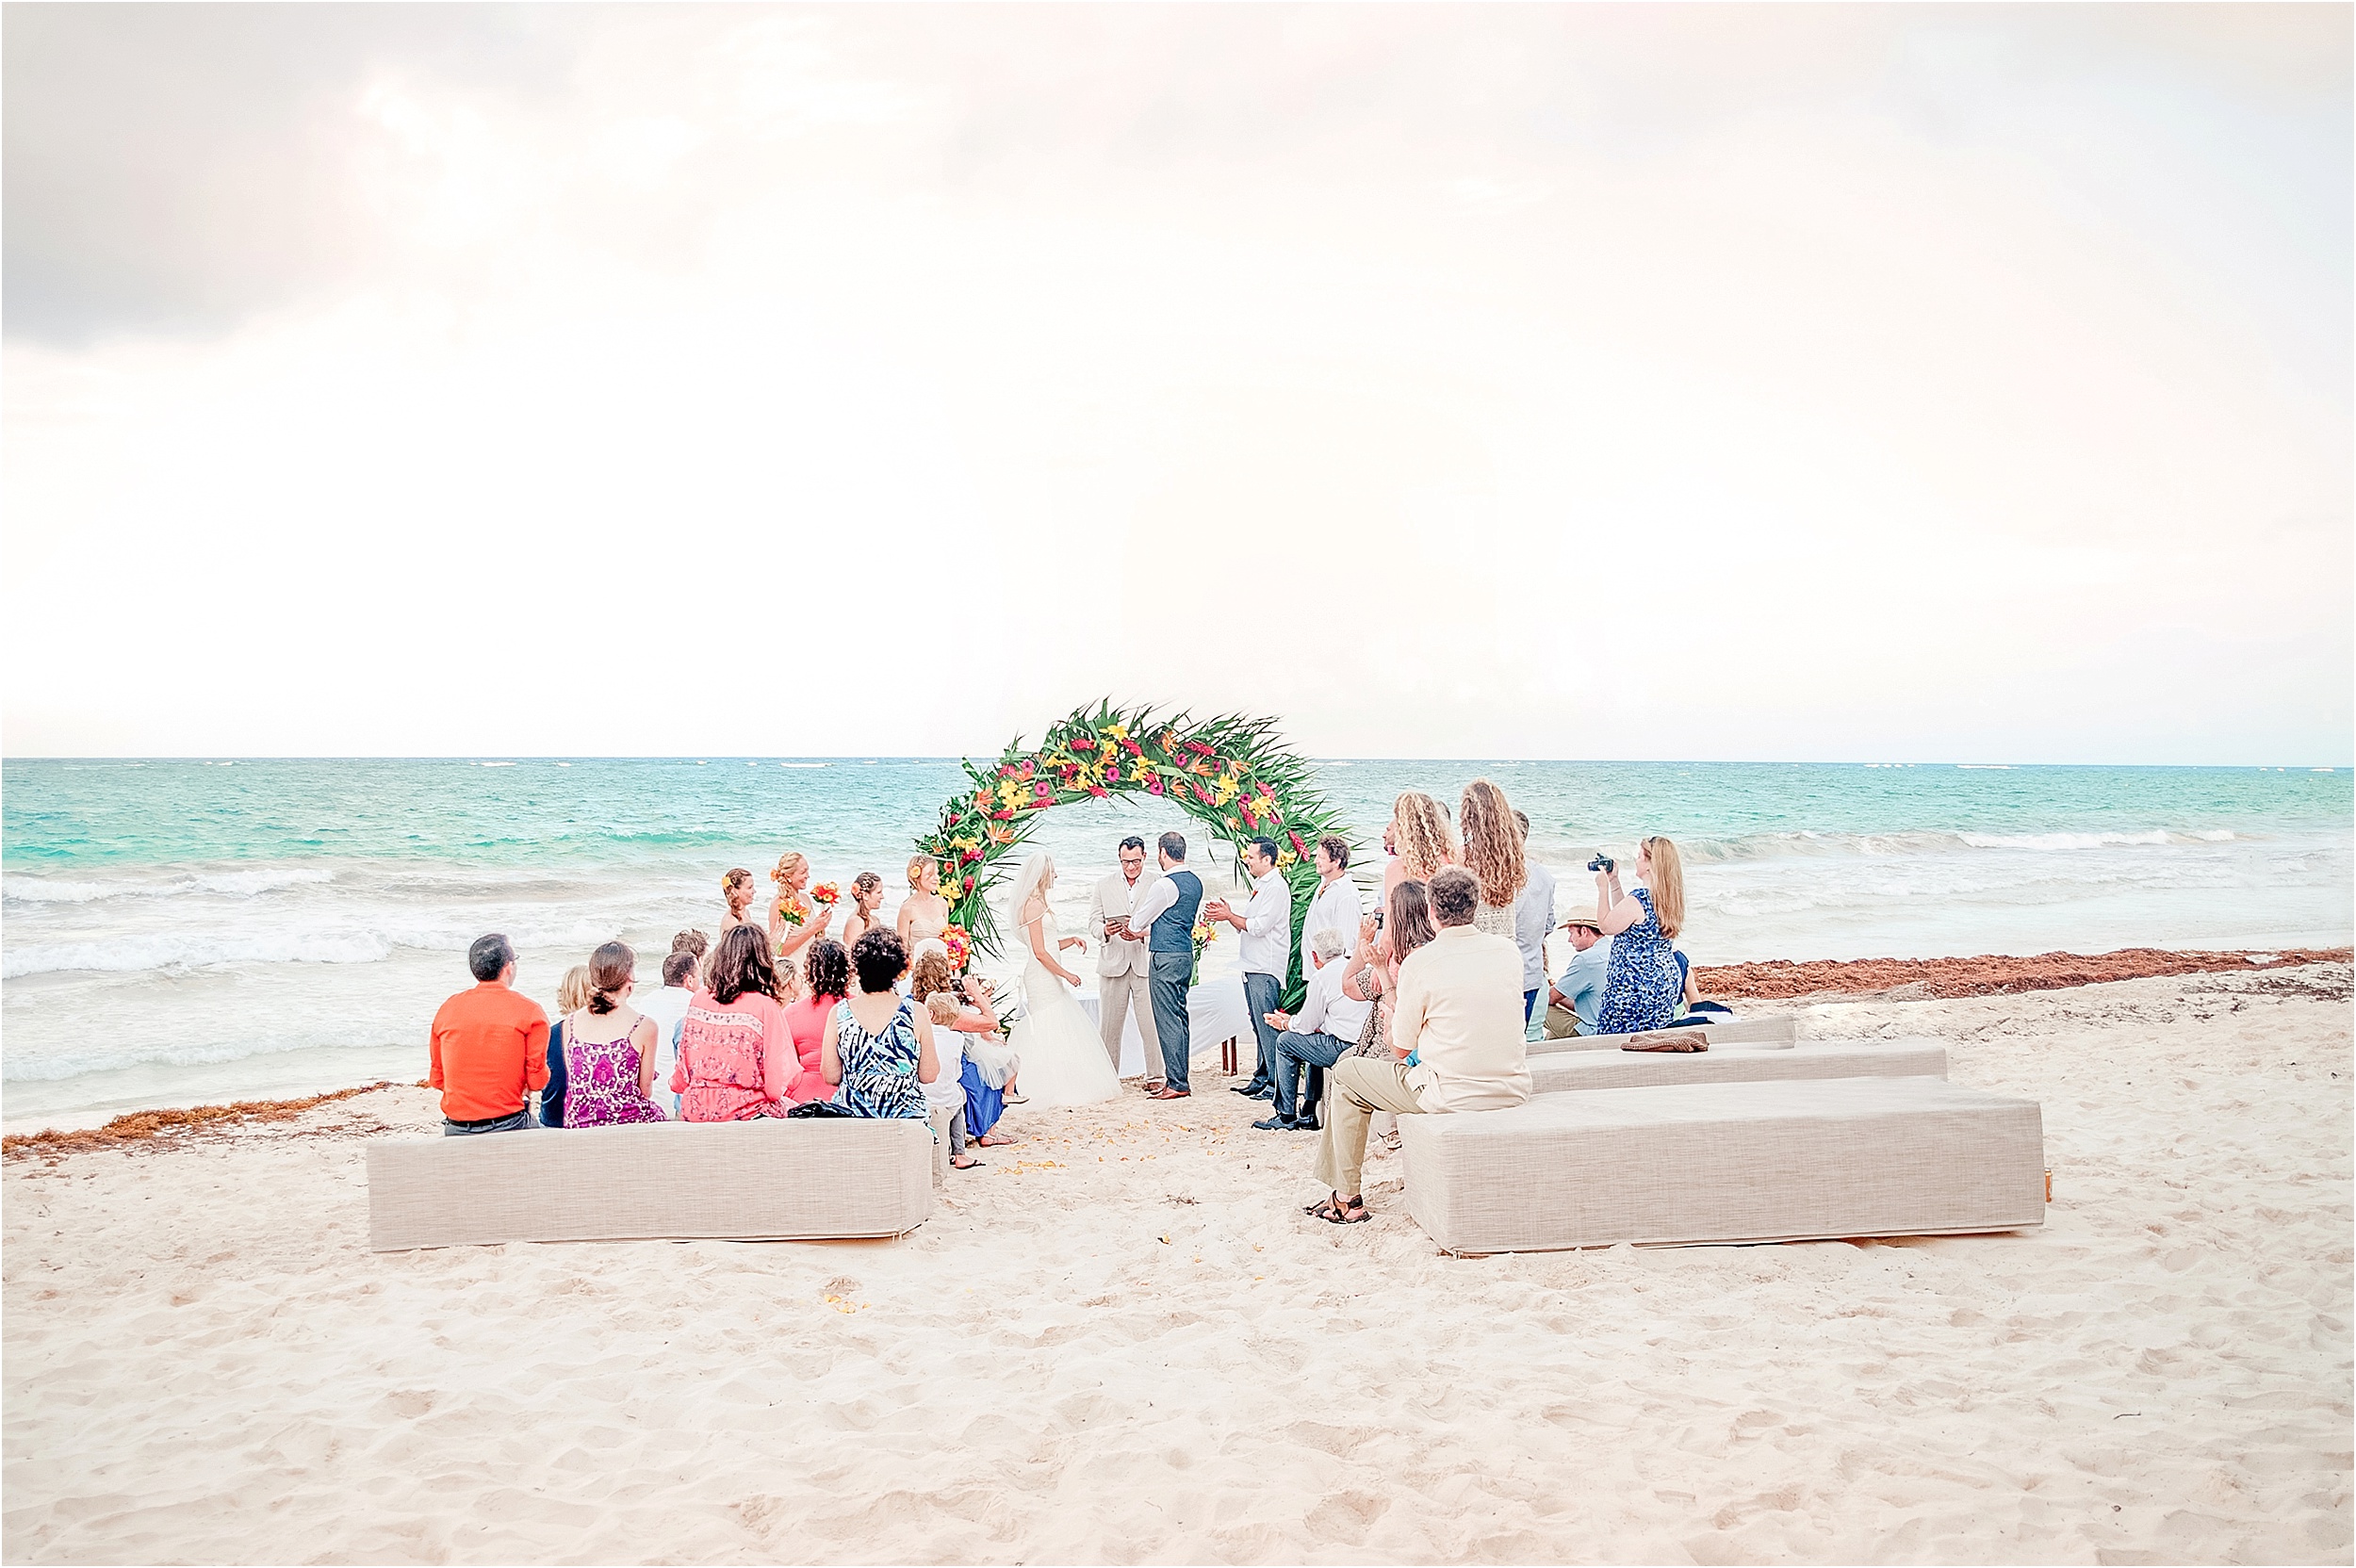 How to Plan Your Dream Destination Wedding: Tips and Tricks